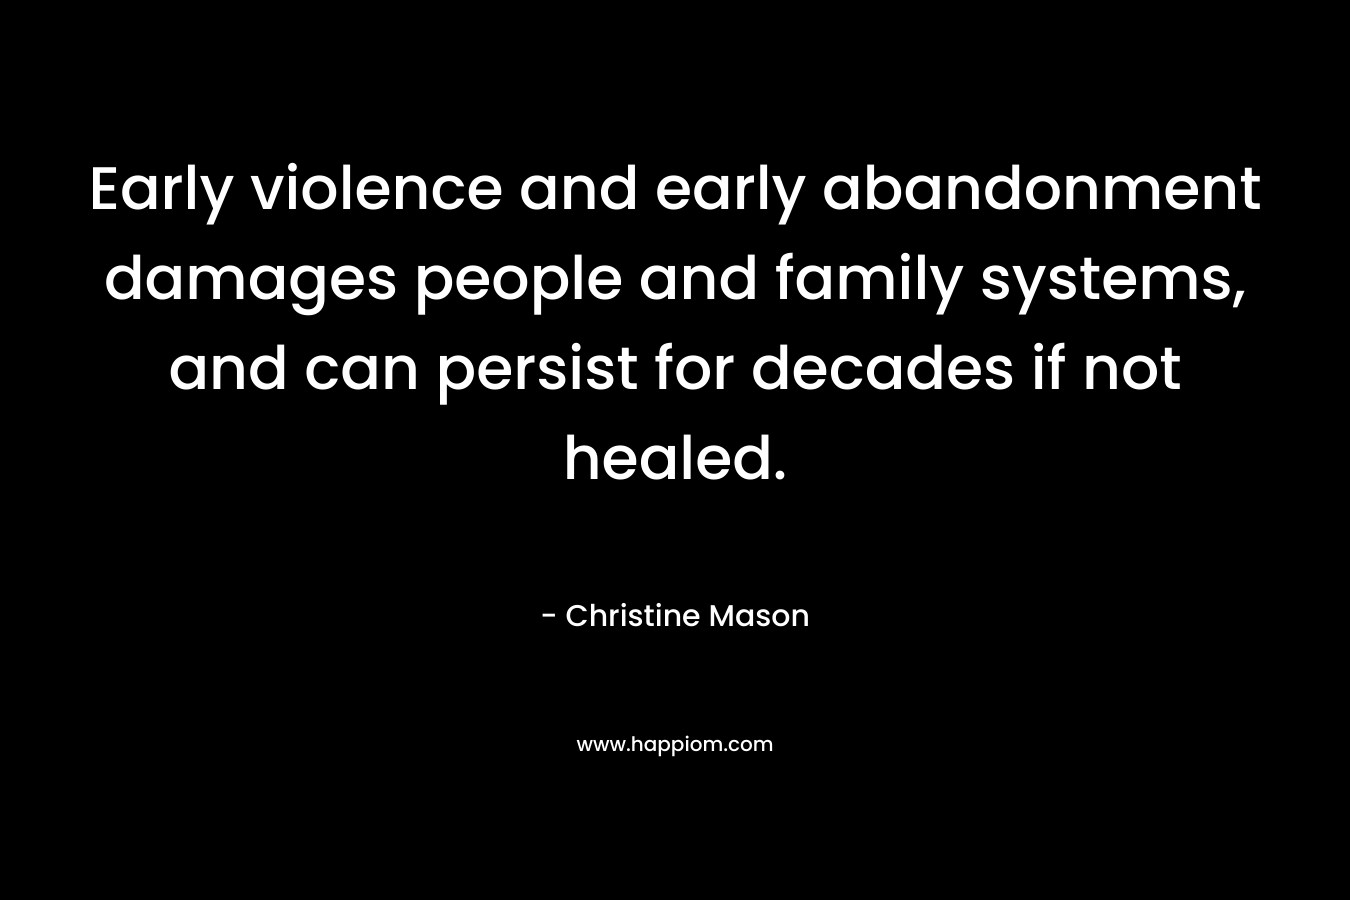 Early violence and early abandonment damages people and family systems, and can persist for decades if not healed.